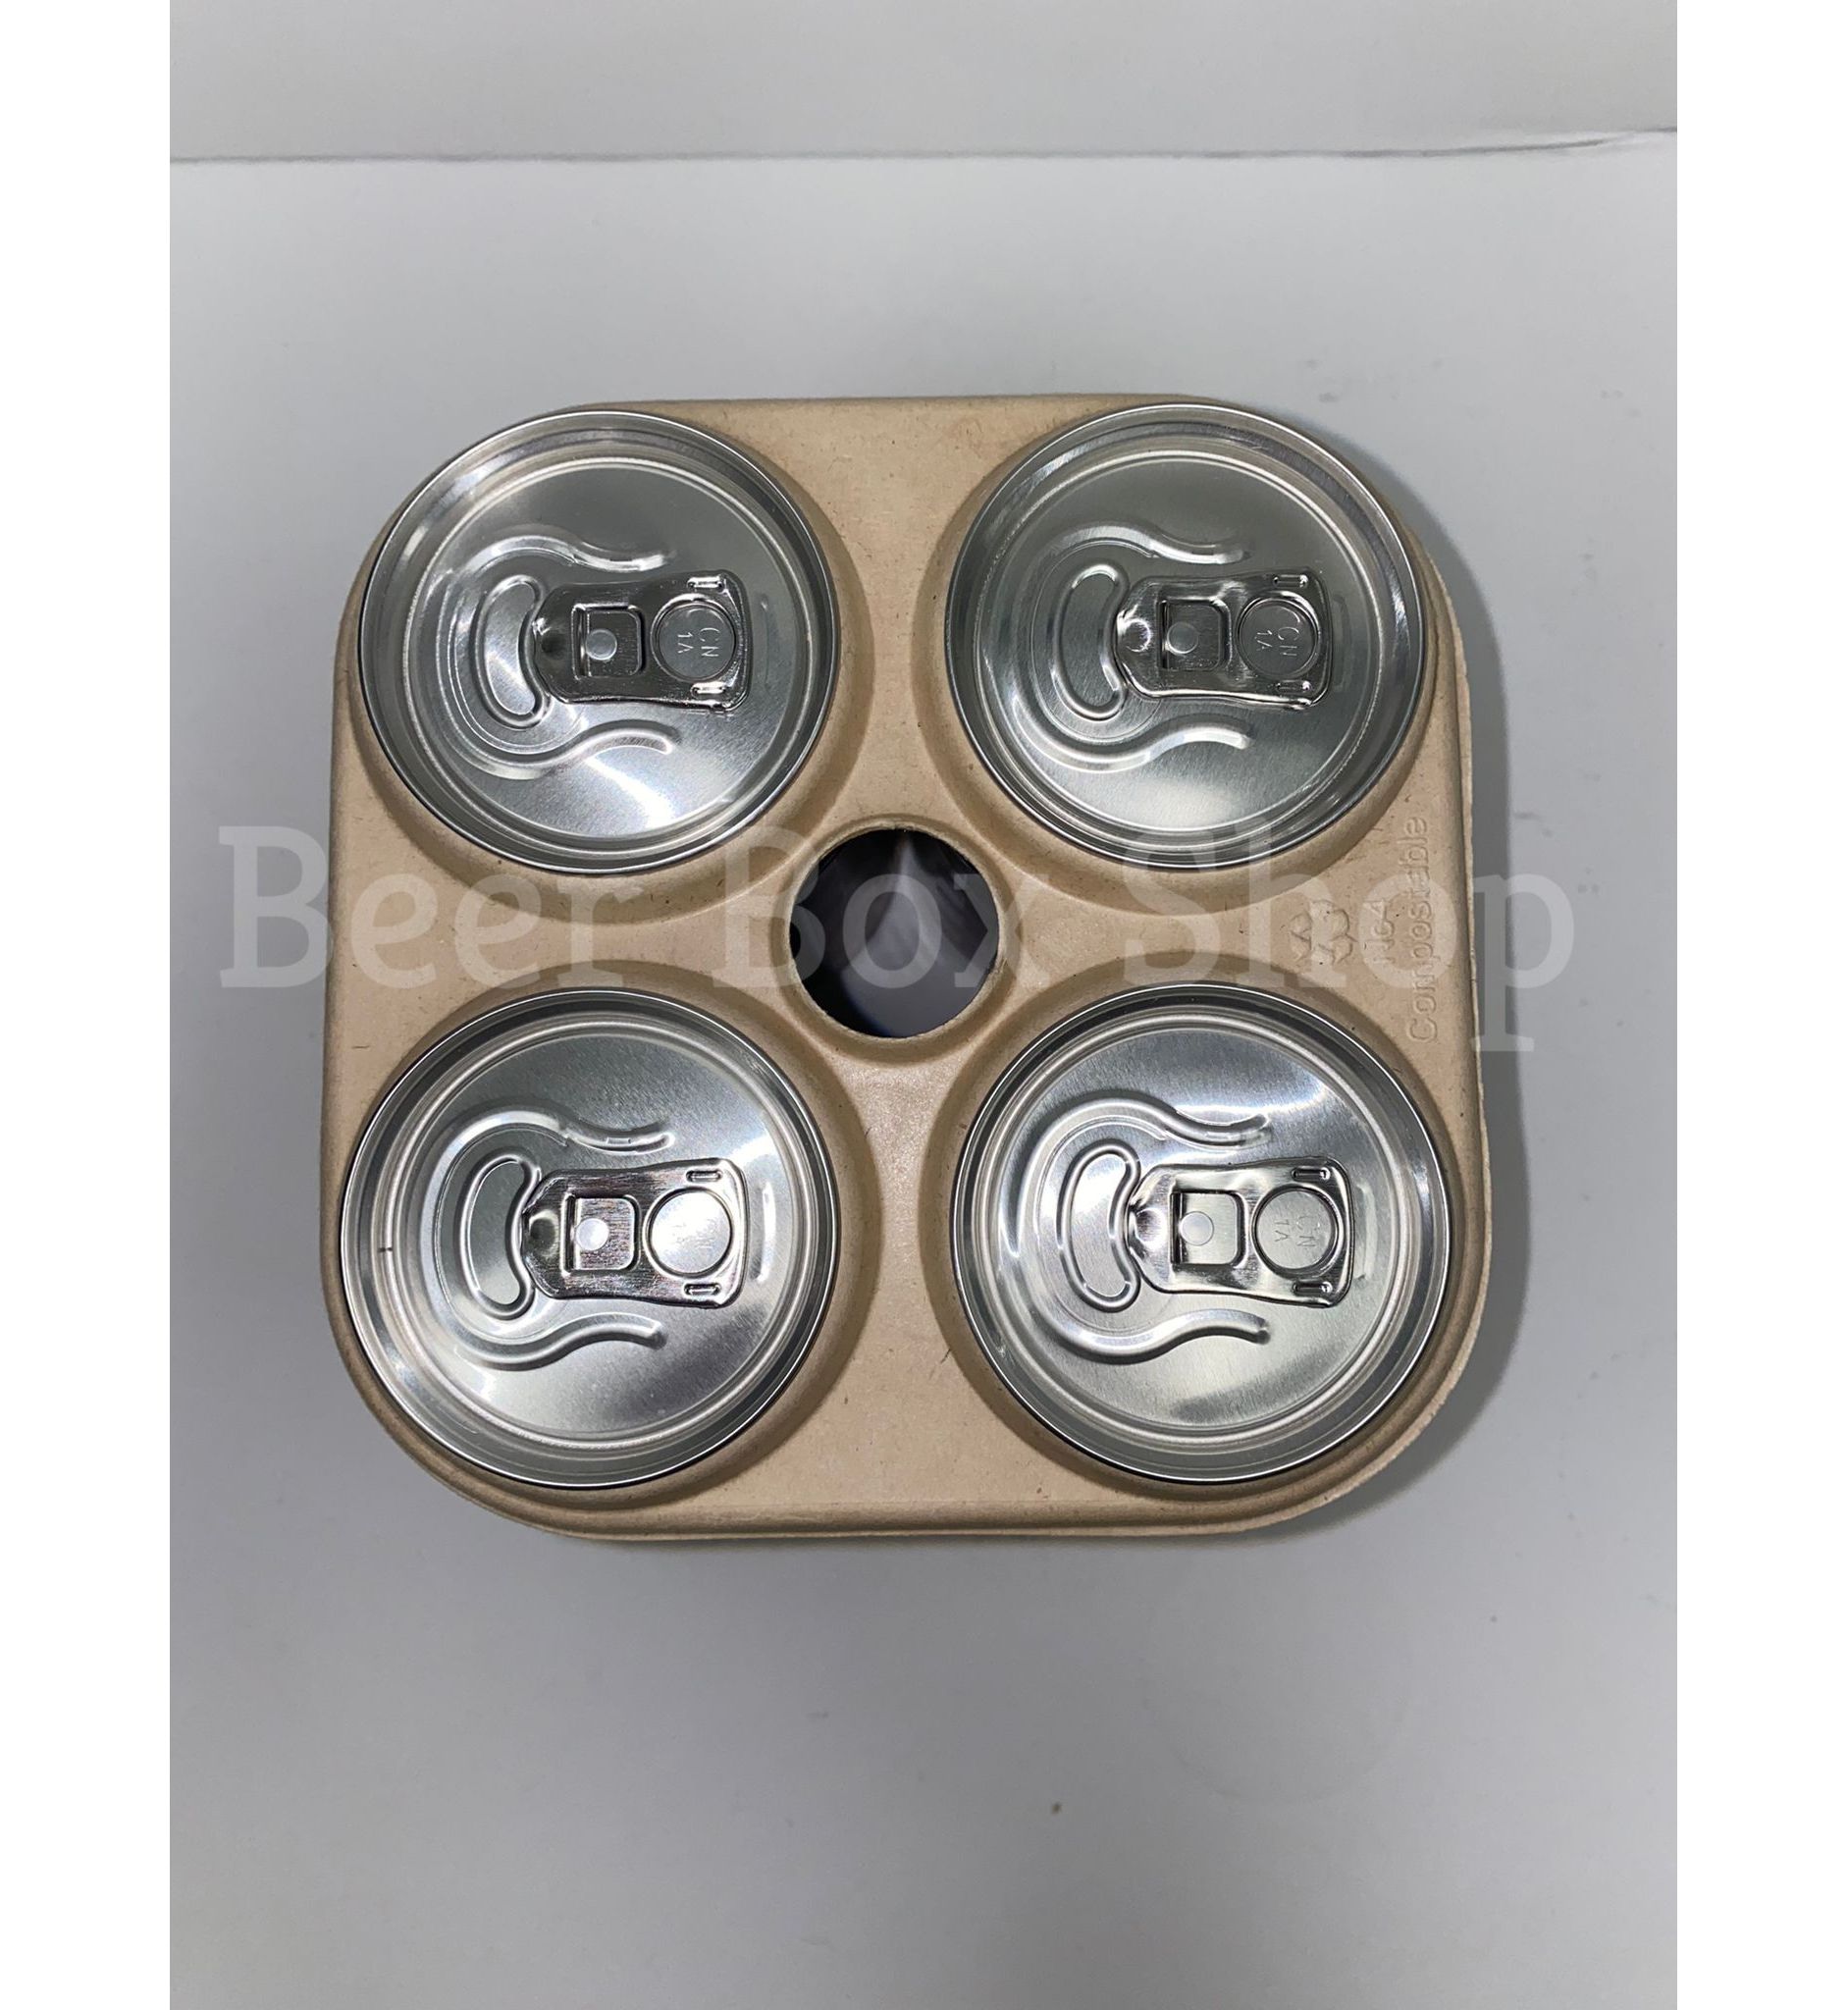 An Eco-Friendly Alternative to Plastic Six-Pack Rings | ProFood World